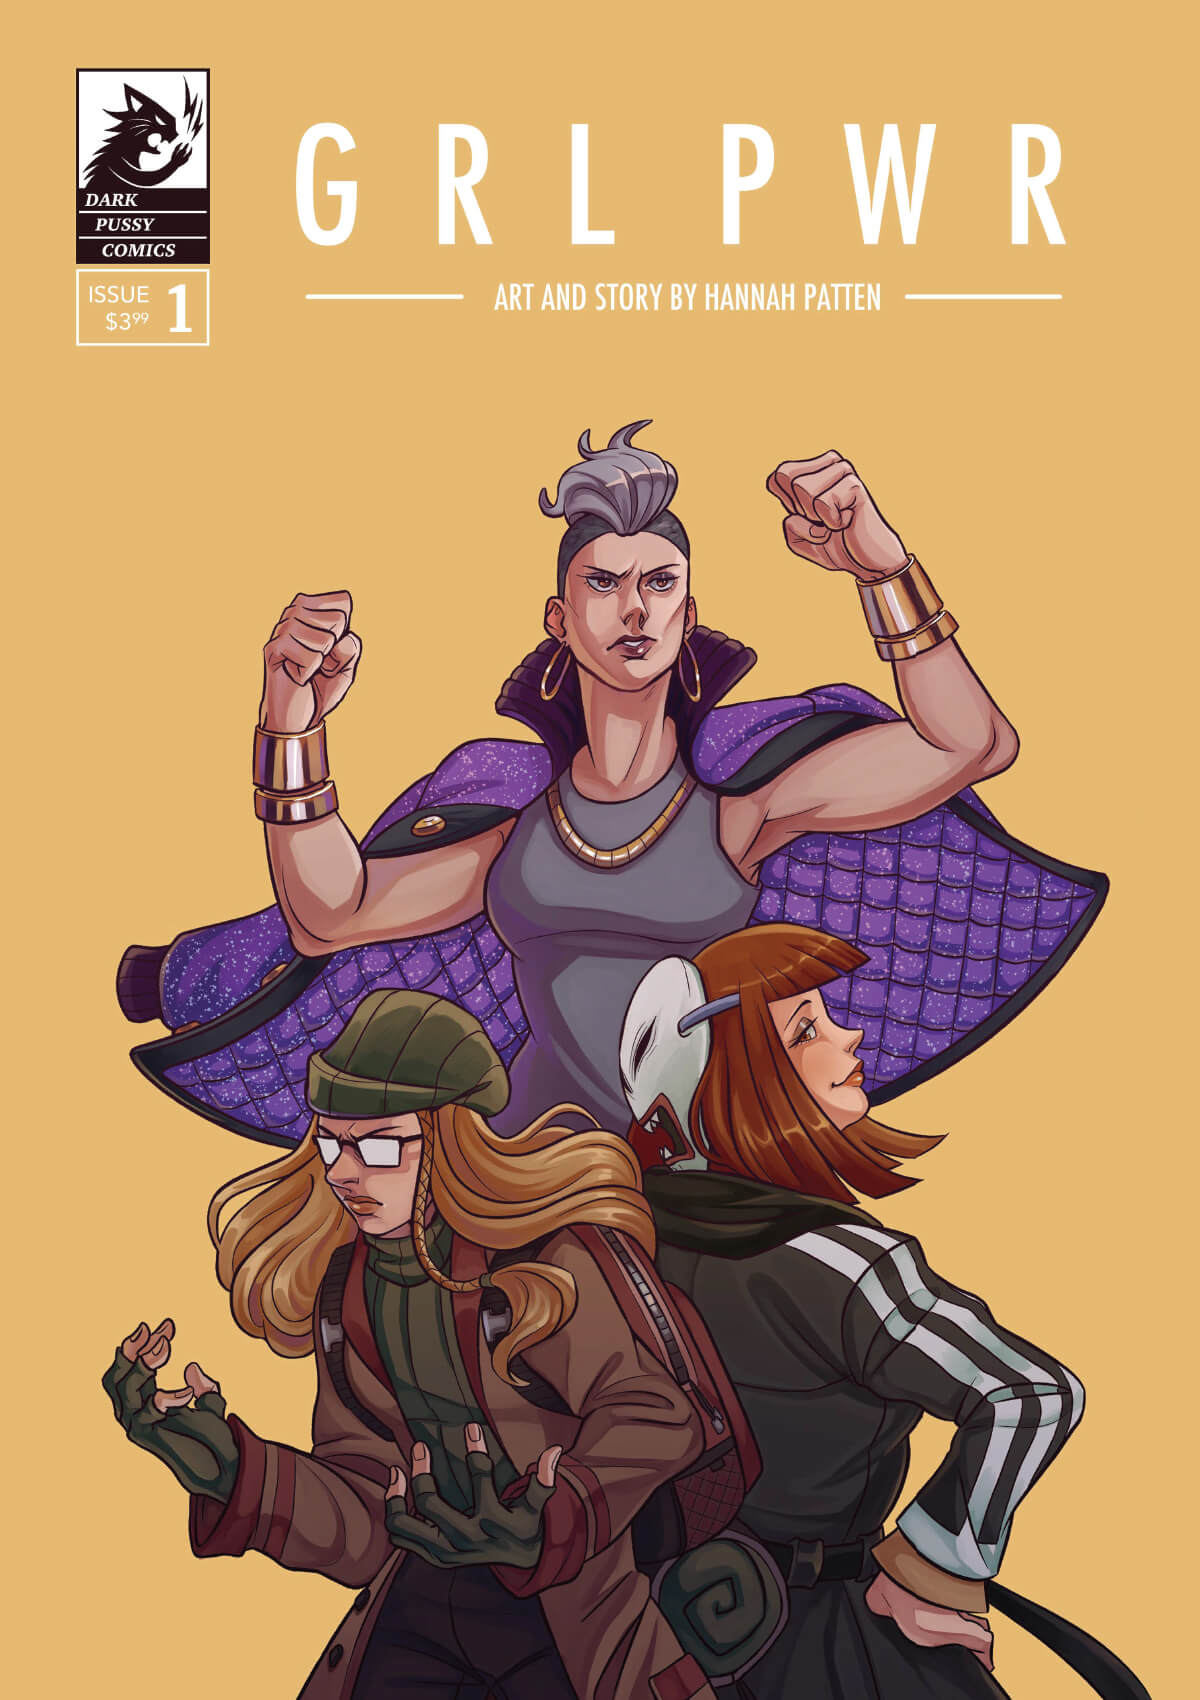 The cover art for Hannah Patten's comic book GRL PWR.